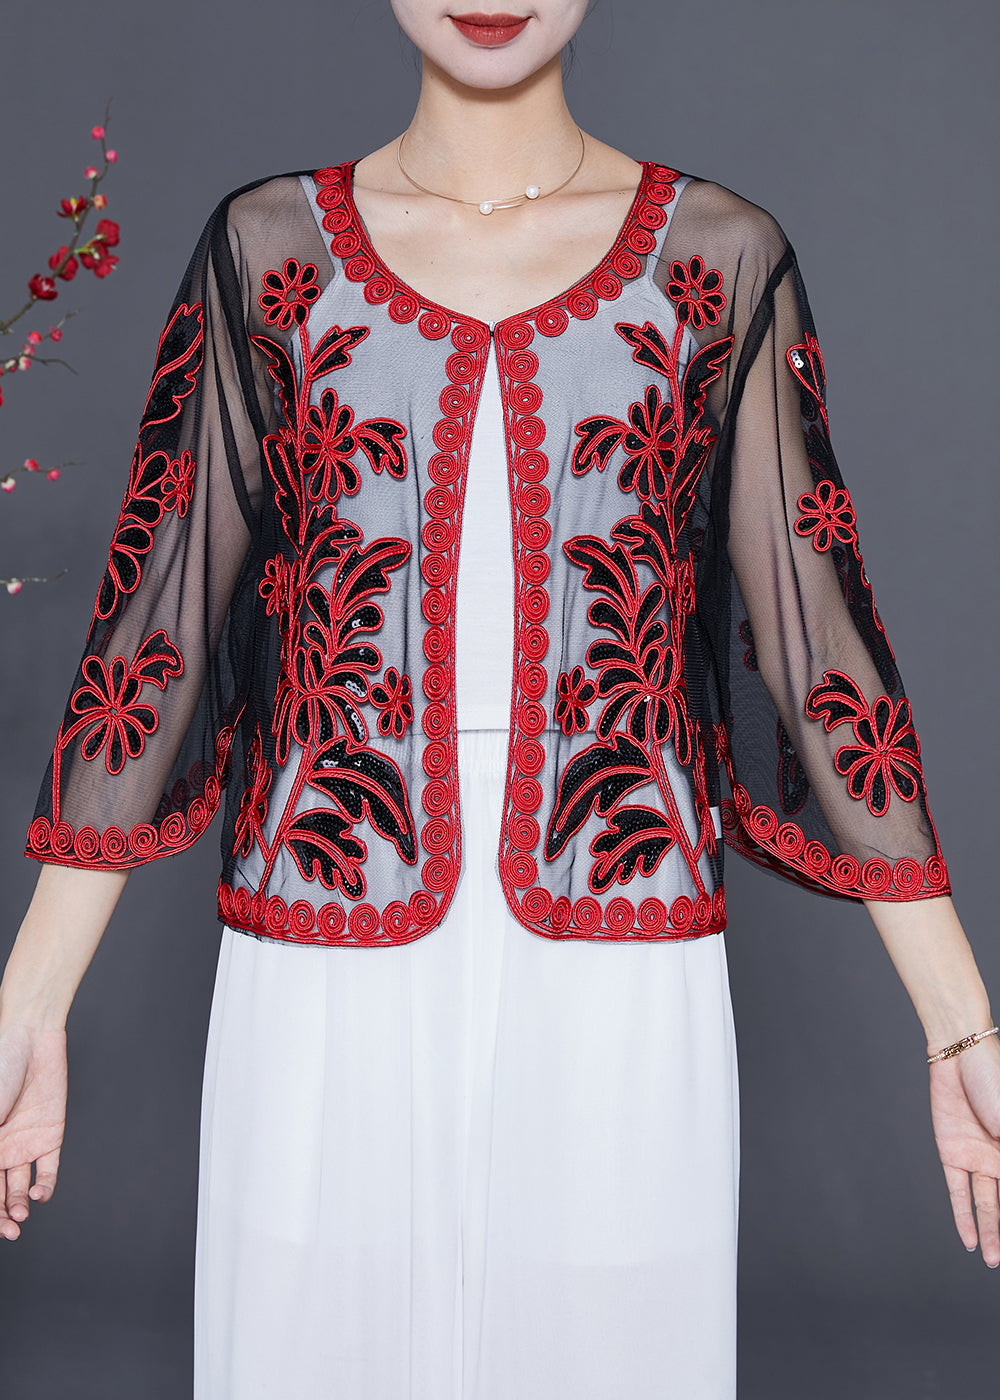 French Red Sequins Embroideried Tulle Loose Cardigan Summer LY5540 - fabuloryshop